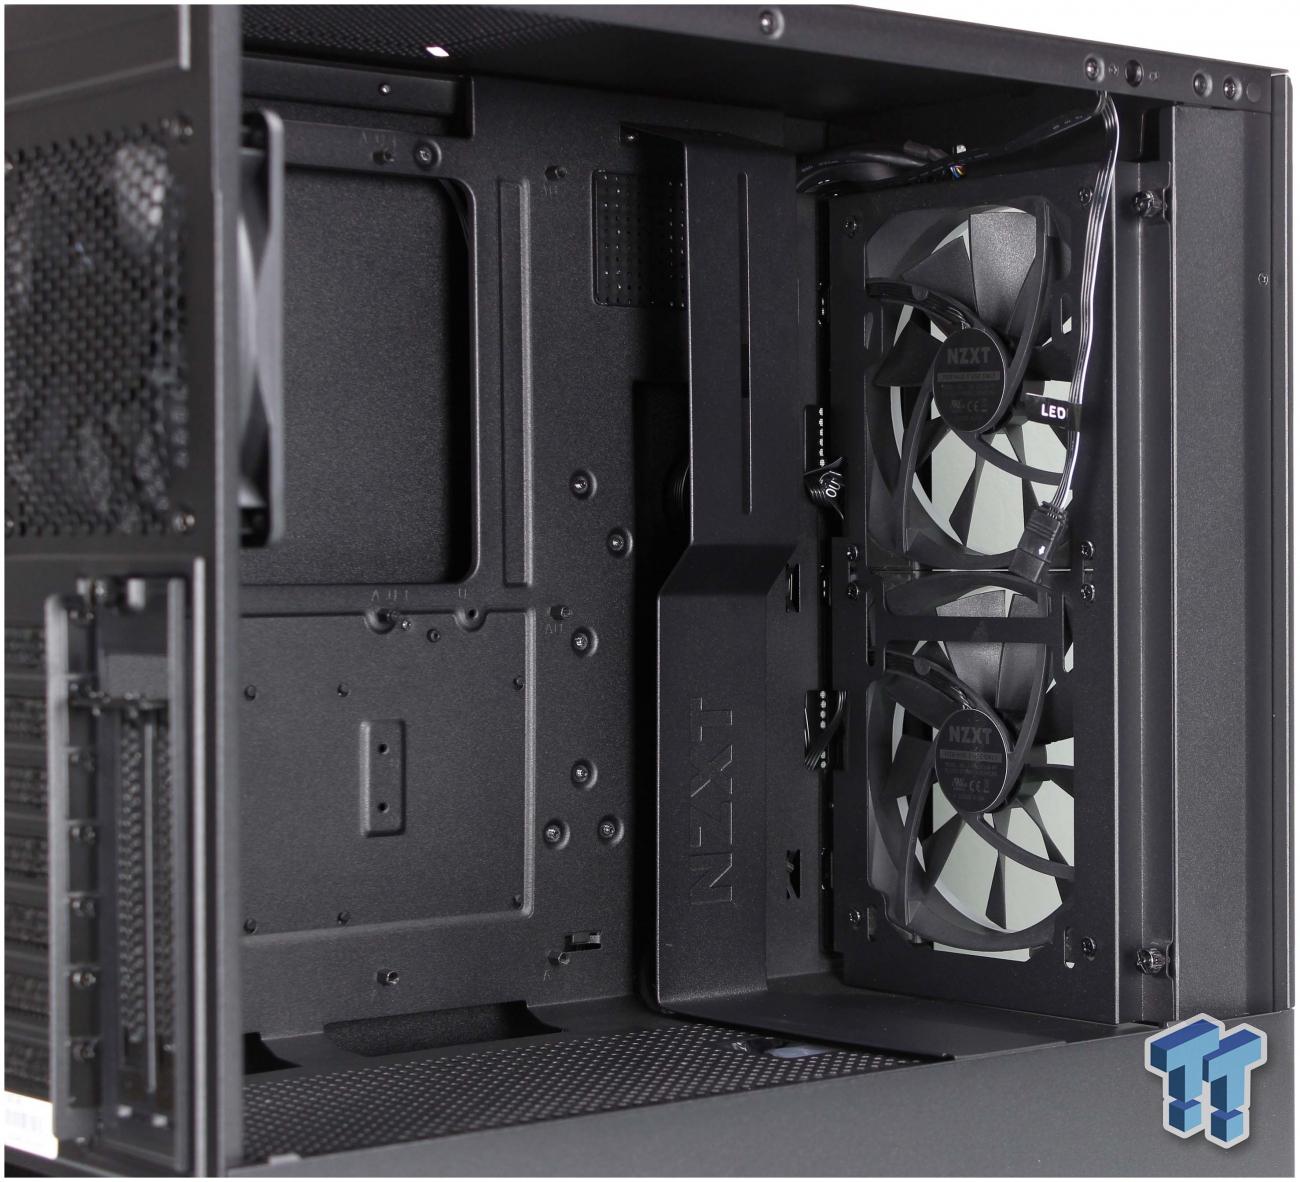 NZXT H510 Elite Chassis Review